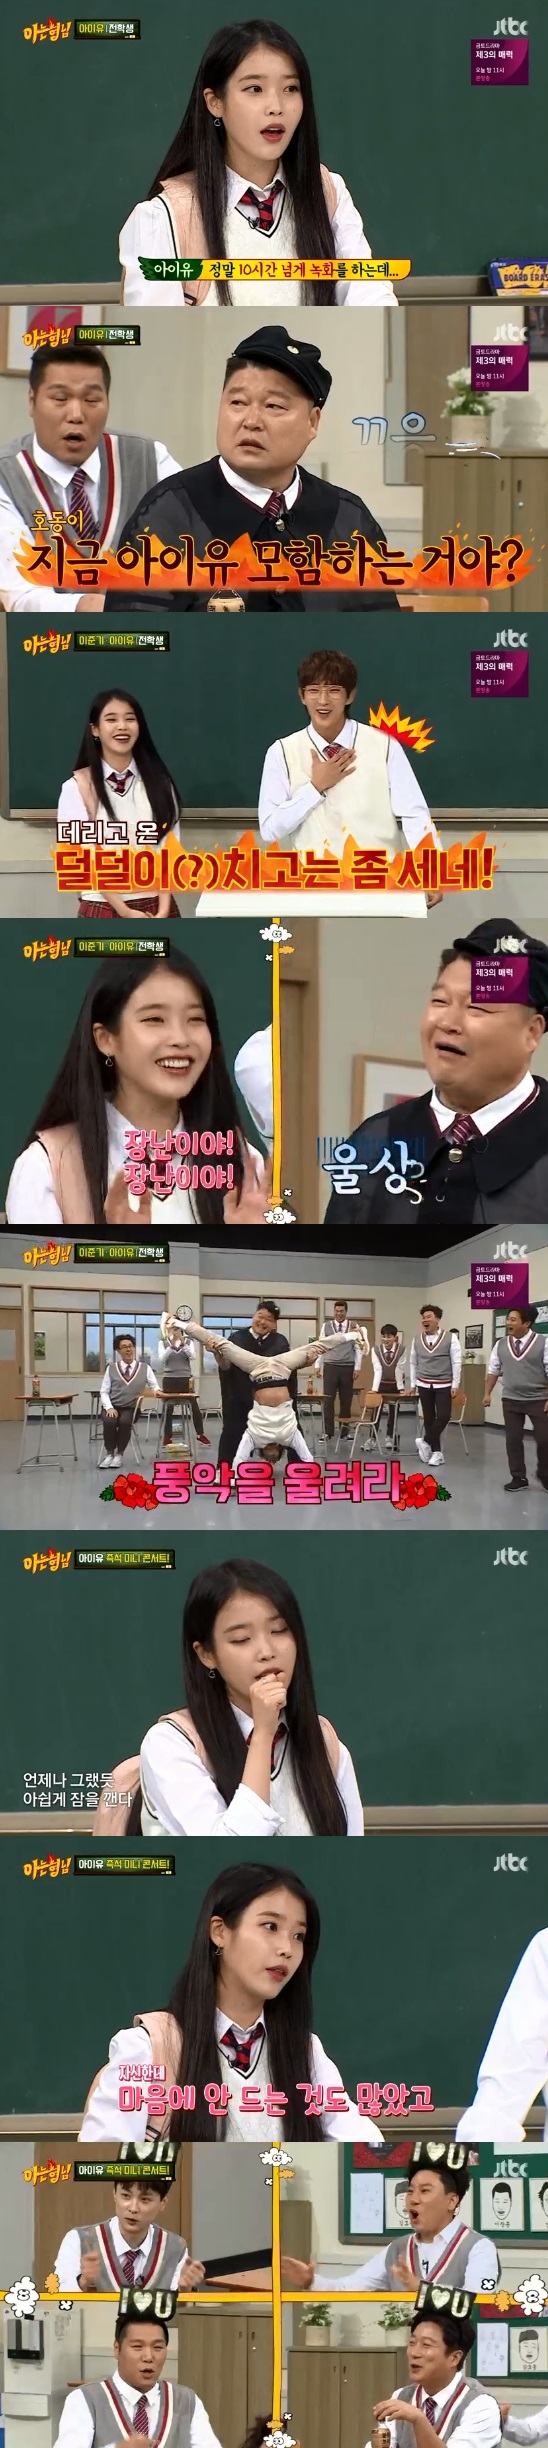 I came all the way here because of Hodong!JTBC Knowing Bros, which was broadcast on the 20th, featured IU and Lee Joon-gi.Kang Ho-dong cheered on the appearance of IU and told an anecdote that he had met at a Chinese airport in the past. He also stressed that IU said that he would appear in Knowing Bros.However, the IU reported an anecdote that was hurt by Kang Ho-dong at the time of SBS stocking recording.Kang Ho-dong said, When I was a rookie, I went to stockings. I recorded for over 10 hours, but I didnt say a word.I was 17 years old at the time, and I went home and wrote a diary saying, I really should be good. From then on, I was able to come here with hard work. Kang Ho-dong has been good to me since Good Day, he added in particular.IU and Lee Joon-gi have been breathing in the past Bobo Sensei Rye.This is the 10th anniversary of my debut, and there is no broadcasting activity this time, so I was worried that it would be a no-jam broadcast because it was difficult to appear on Knowing Bros.So I asked Lee Joon-gi to worry about who my honey jam friend is. Lee Joon-gi has a relationship with Kang Ho-dong in the past Knee Pak Master: When I wanted to talk to the public, I enthusiastically wrapped and hugged him.I kept pulling him, he said, thanking him.There were many episodes between the two and Kang Ho-dong.IU and Kang Ho-dong once took a commercial for marts together in the past, and once again wrote a diary after stockings at the time.I told him, When I fall down, I have to do 101 to survive. But I was not in a difficult state, so I made a vague reaction.But when you think about it, Kang Ho-dong is right, and I was able to survive because of it. IU, Lee Joon-gi, then showed off a variety of charms: Lee Joon-gi boasted a flexible body, and IU made the recording scene into a concert hall with a cheerful voice.I dont think I liked me for a long time, there was a lot I didnt like, but recently Ive improved, and even if Im born again, I want to be born as me.There is no envy, and I am satisfied. The IU cited its merits as head clerks.I learned yoga from Lee Hyo-ri at Hyoris guest house and learned to stand in the water. IU said, I really do not have any exercise, but I was standing in a water tree and tears.Lee Joon-gi also surprised everyone by showing organs such as leg tearing, kicking and hip walking.At this time, Kang Ho-dong was also hit by Lee Joon-gis kick.Photo: JTBC